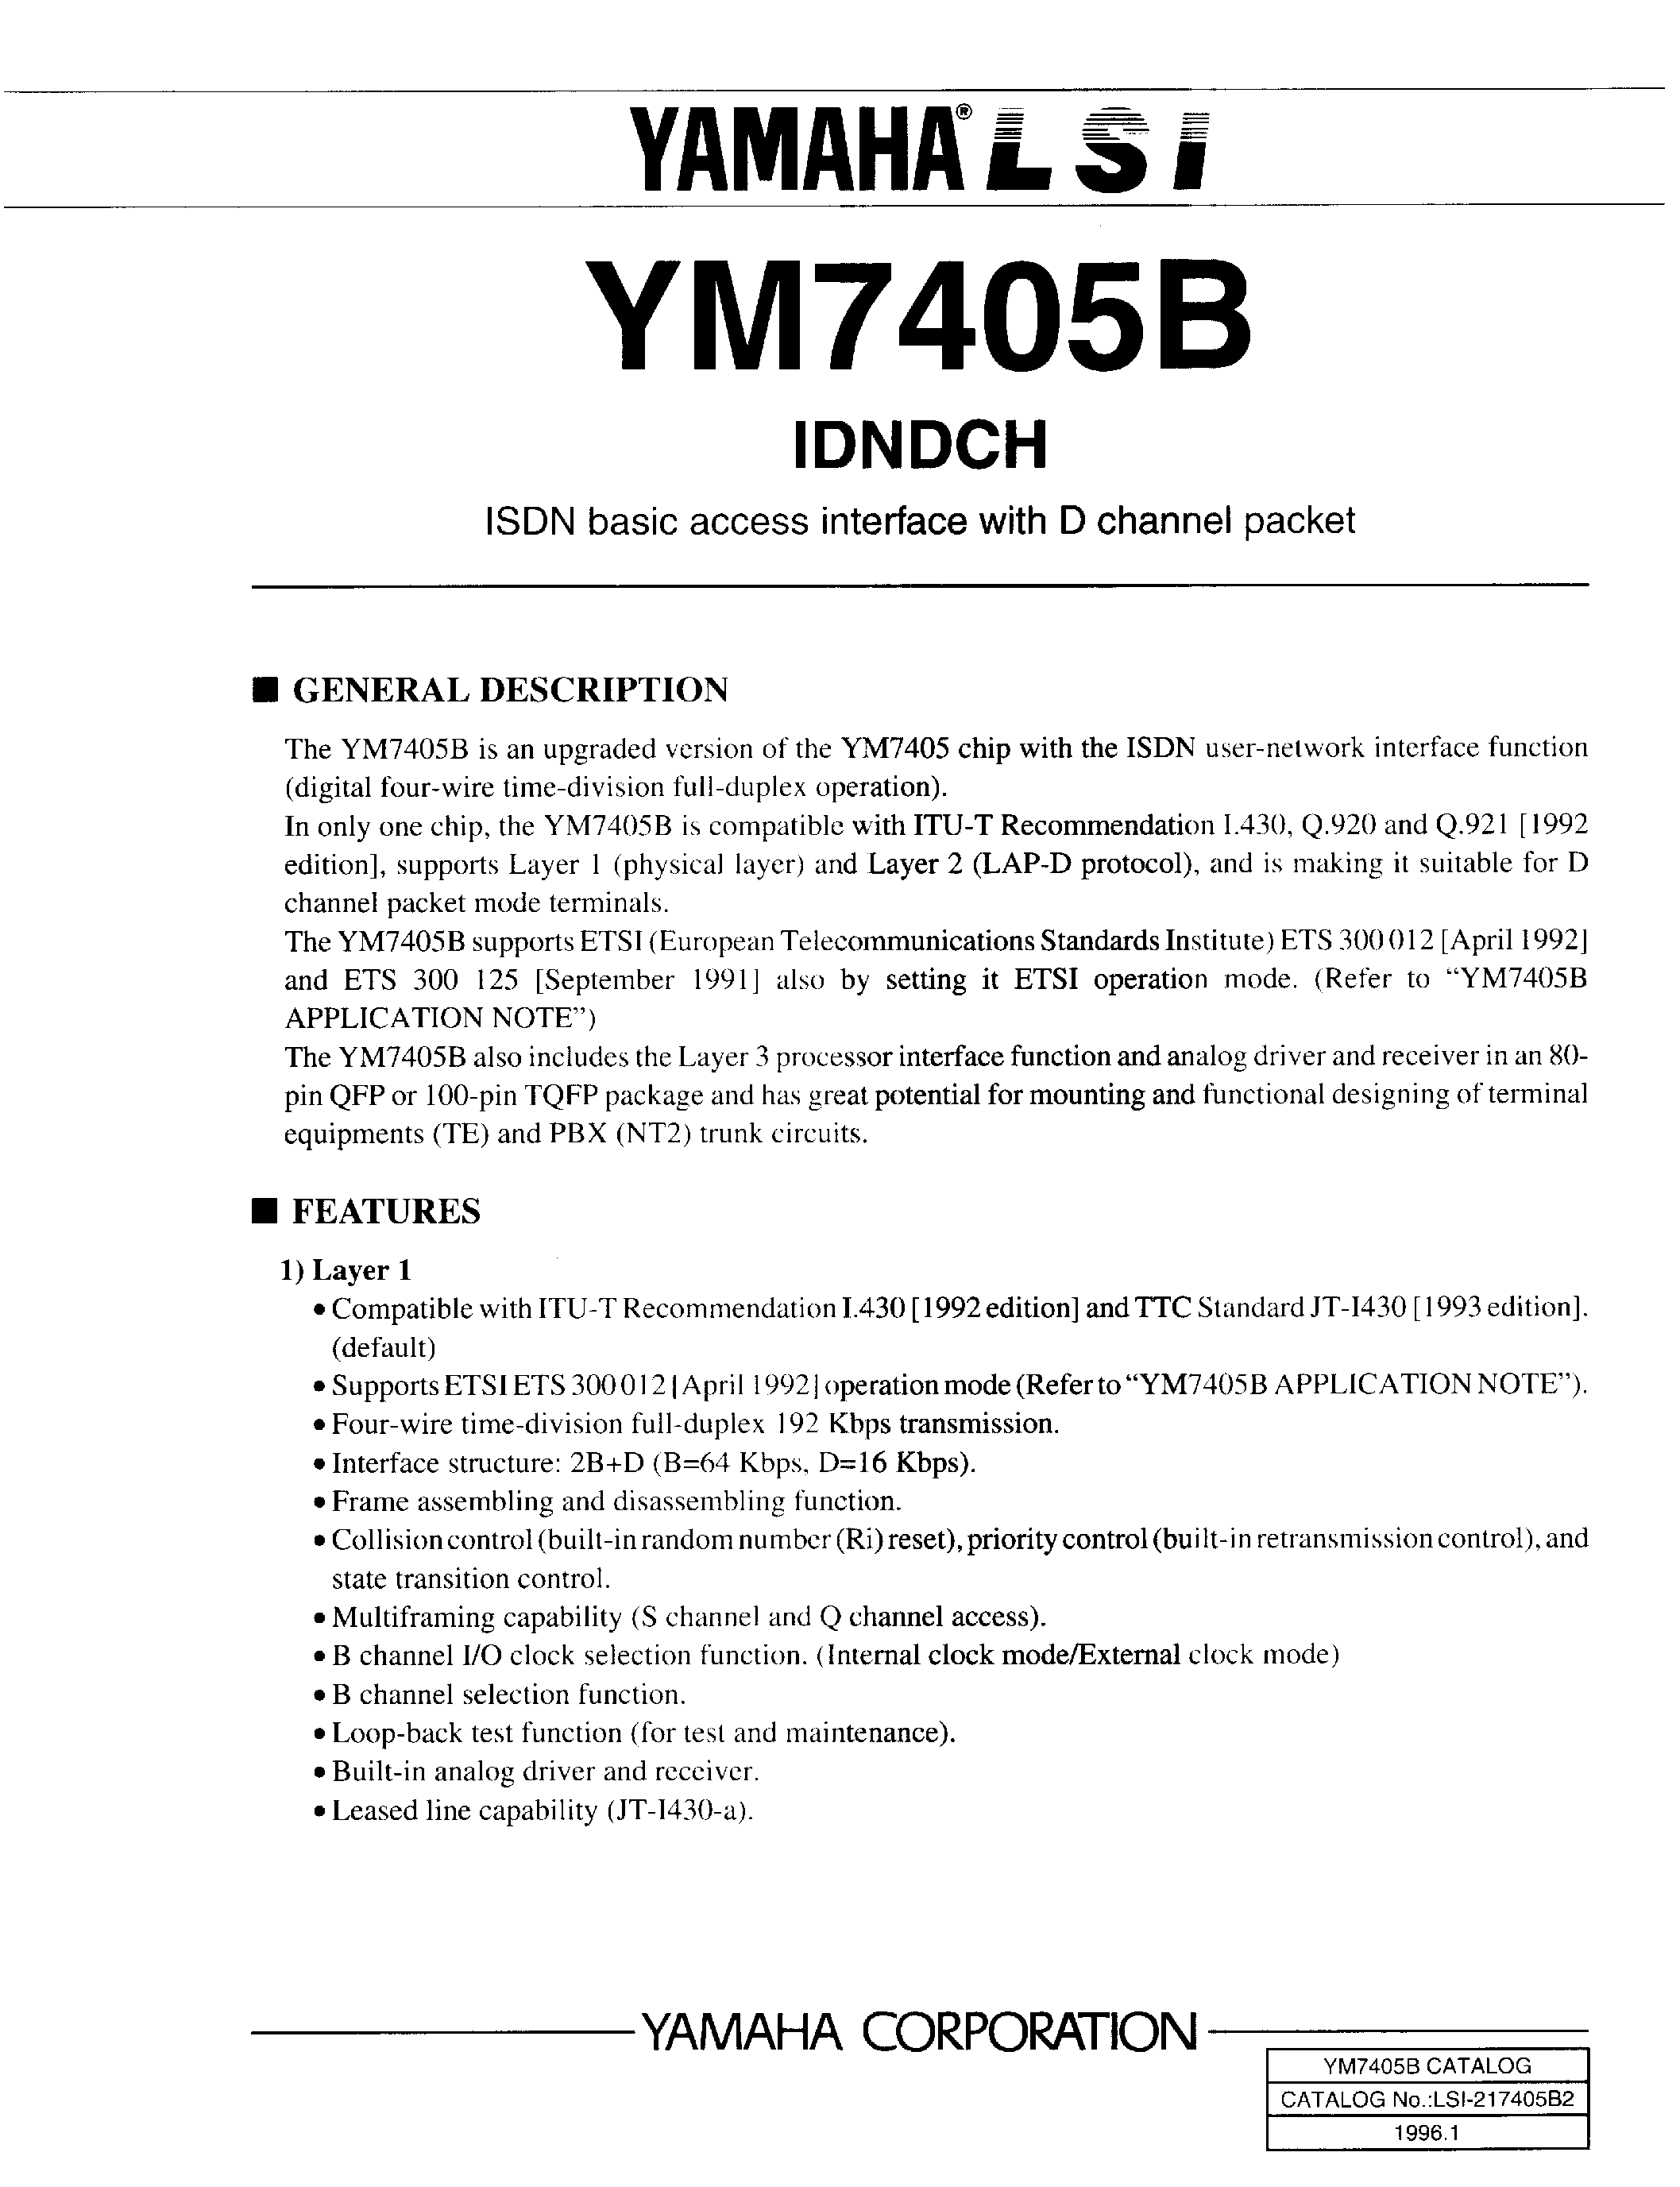 Даташит YM7405B - ISDN BASIC ACCESS INTERFACE WITH D CHANNEL PACKET страница 1